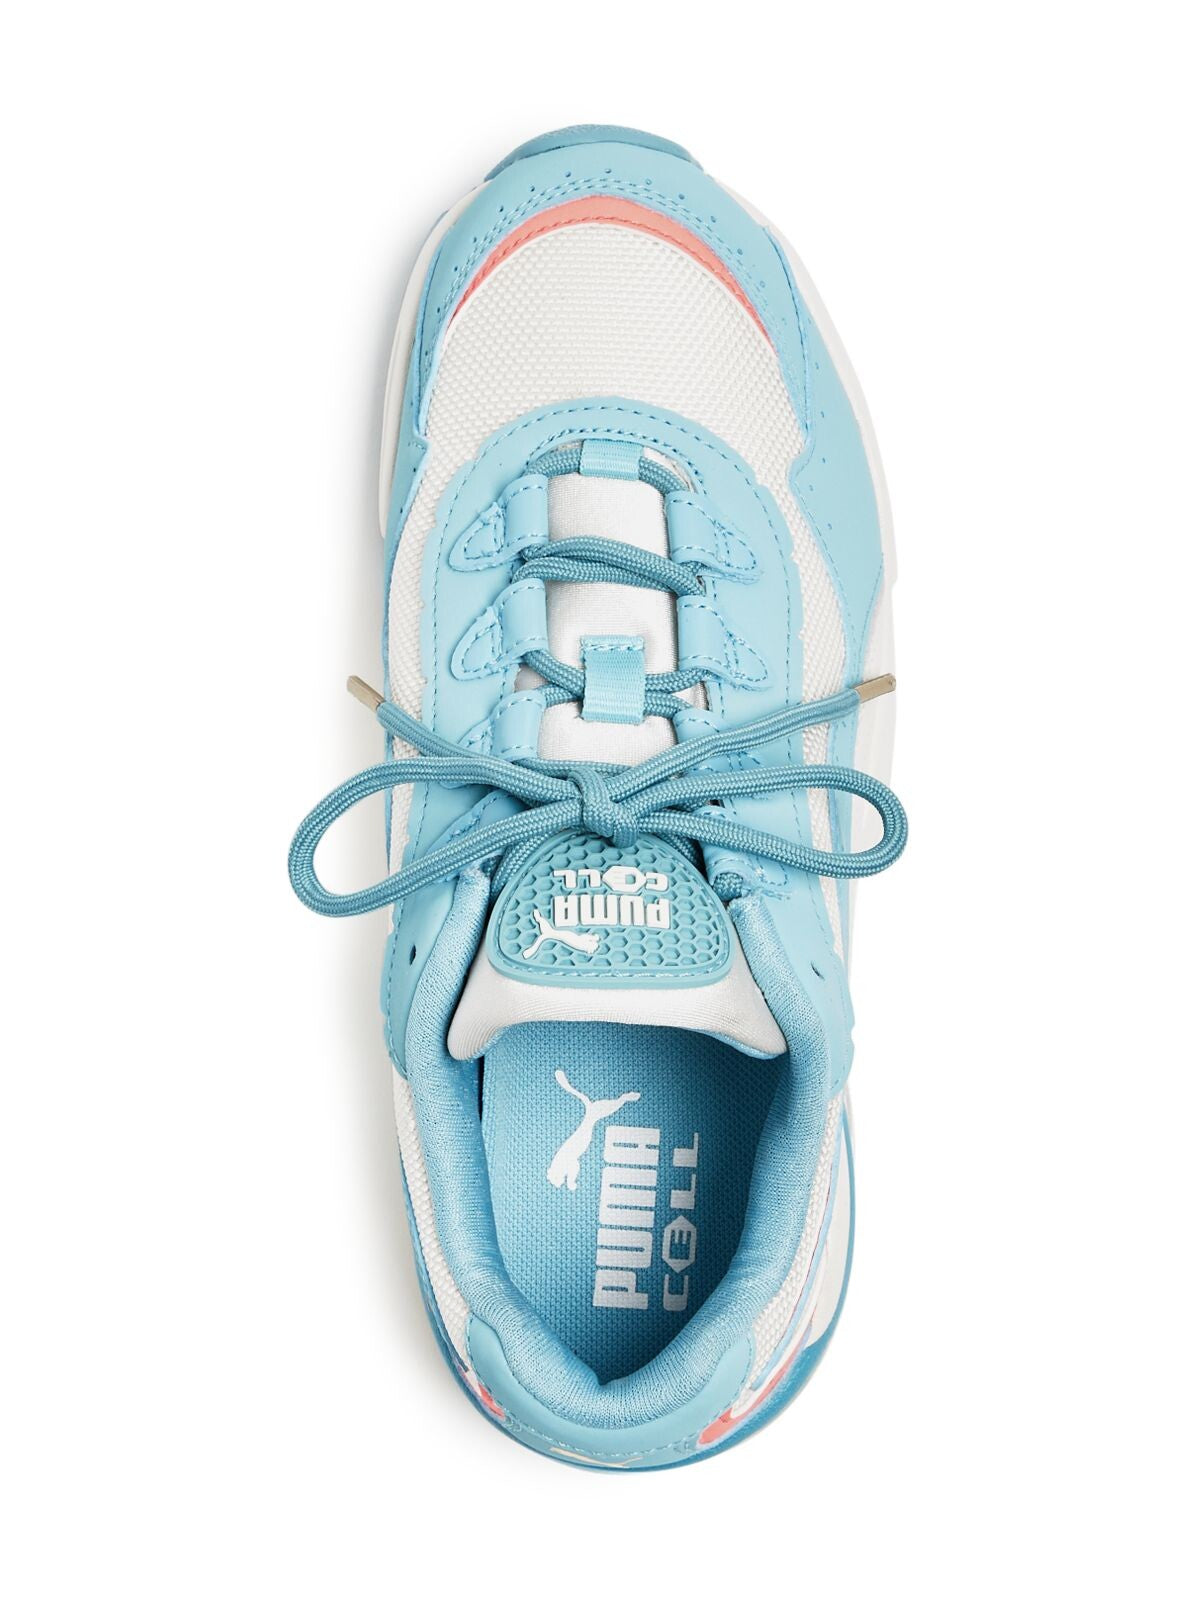 PUMA Womens Light Blue Mixed Media Removable Insole Breathable Cushioned Cell Stellar Round Toe Lace-Up Leather Athletic Sneakers Shoes